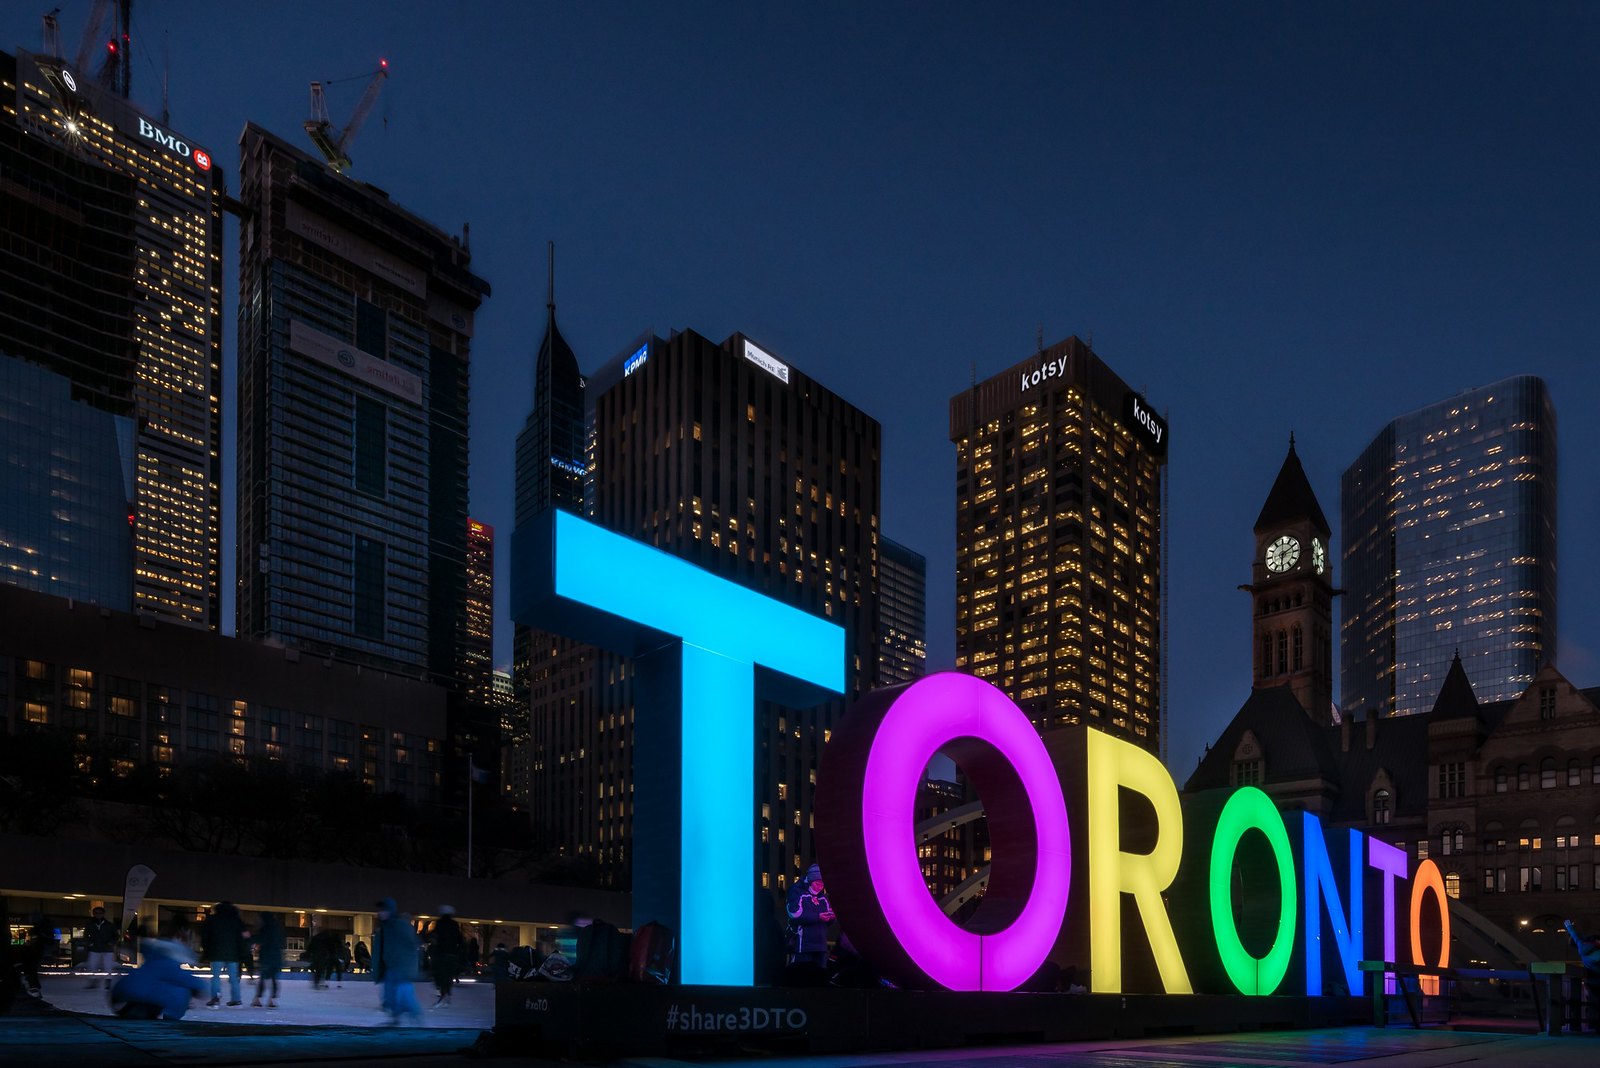 The colourful TORONTO sign by night